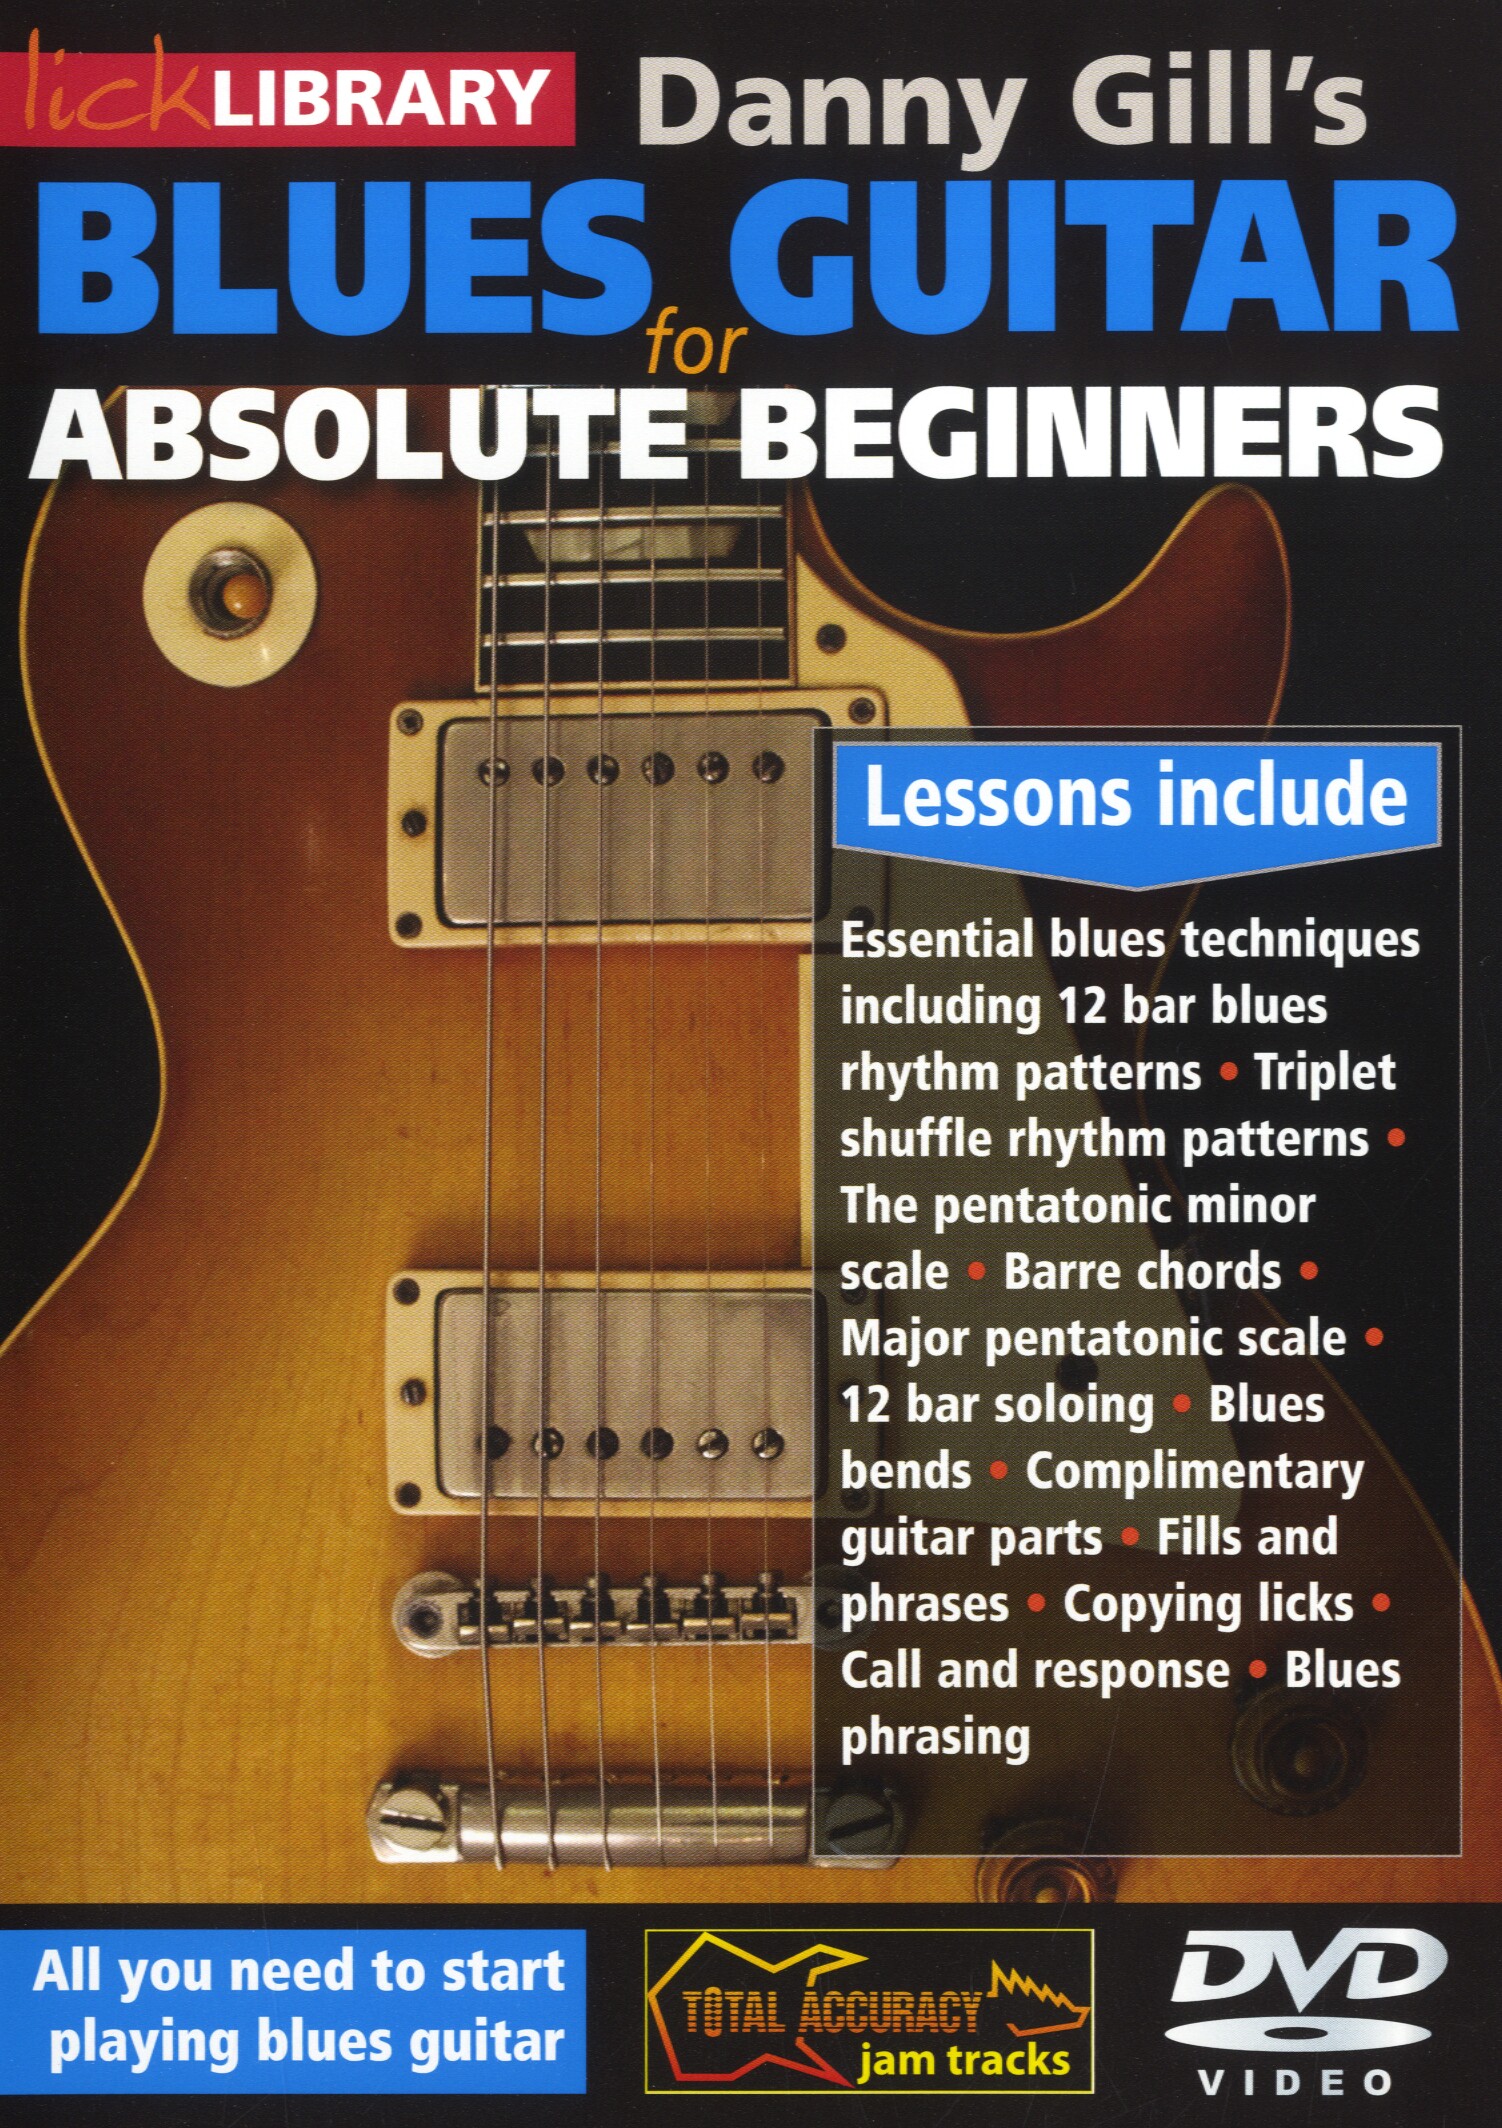 Danny Gill: Danny Gill's Blues Guitar for Absolute Beginners: Guitar: